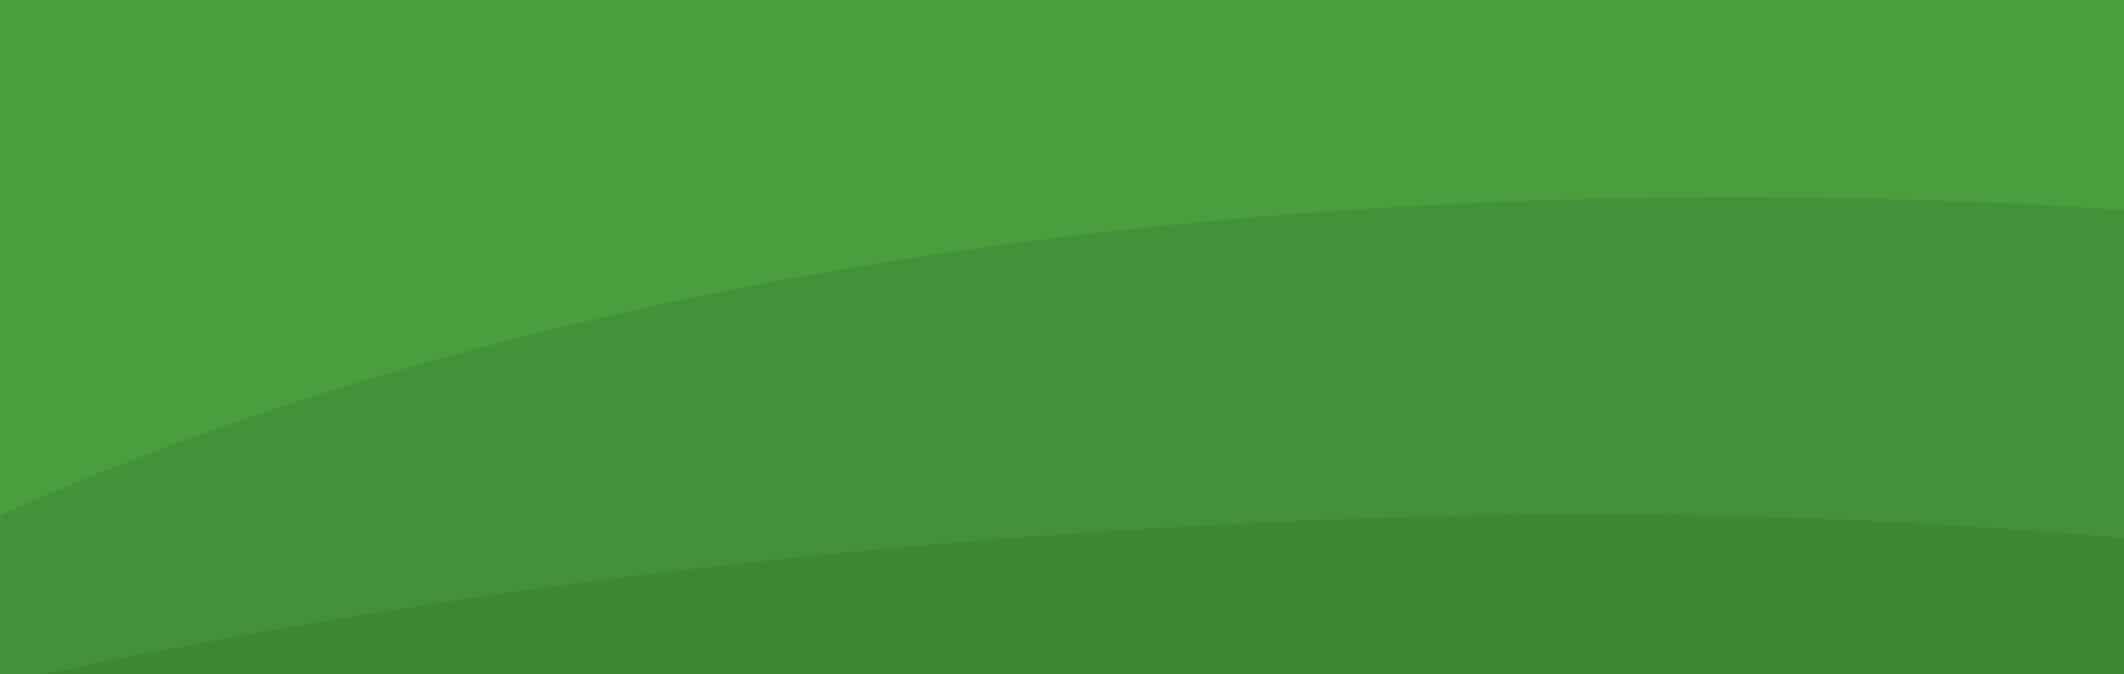 Green services background